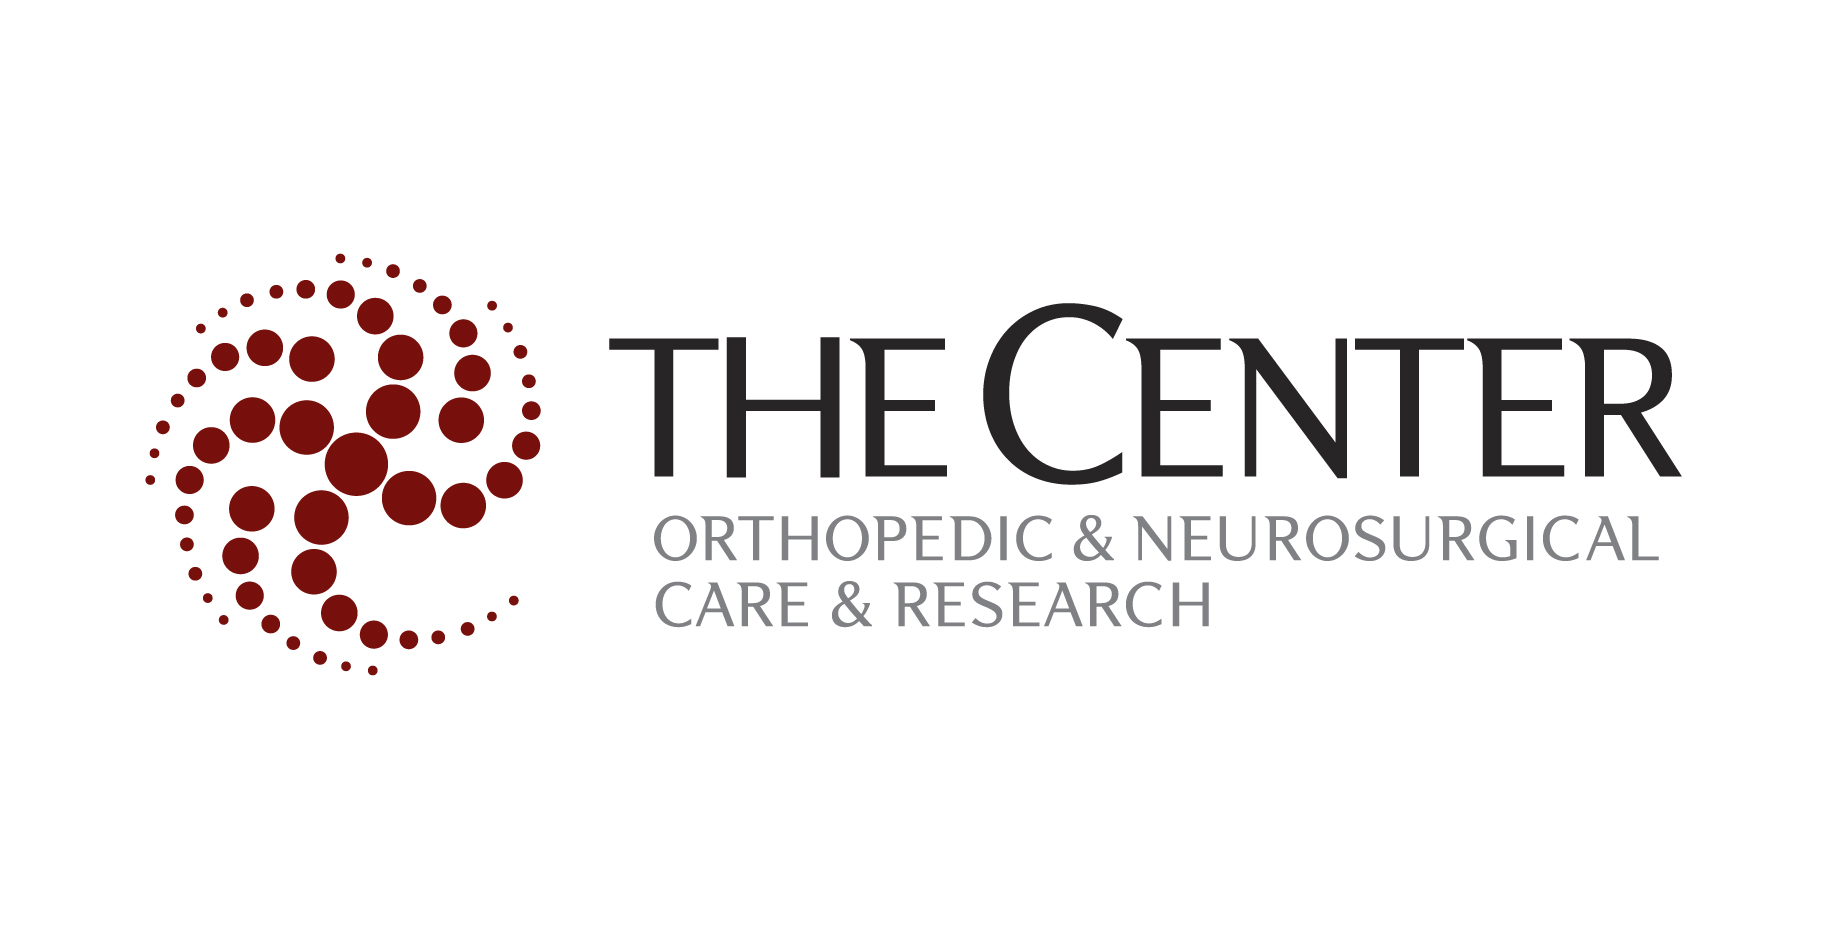 The Center Orthopedic & Neurosurgical Care & Research